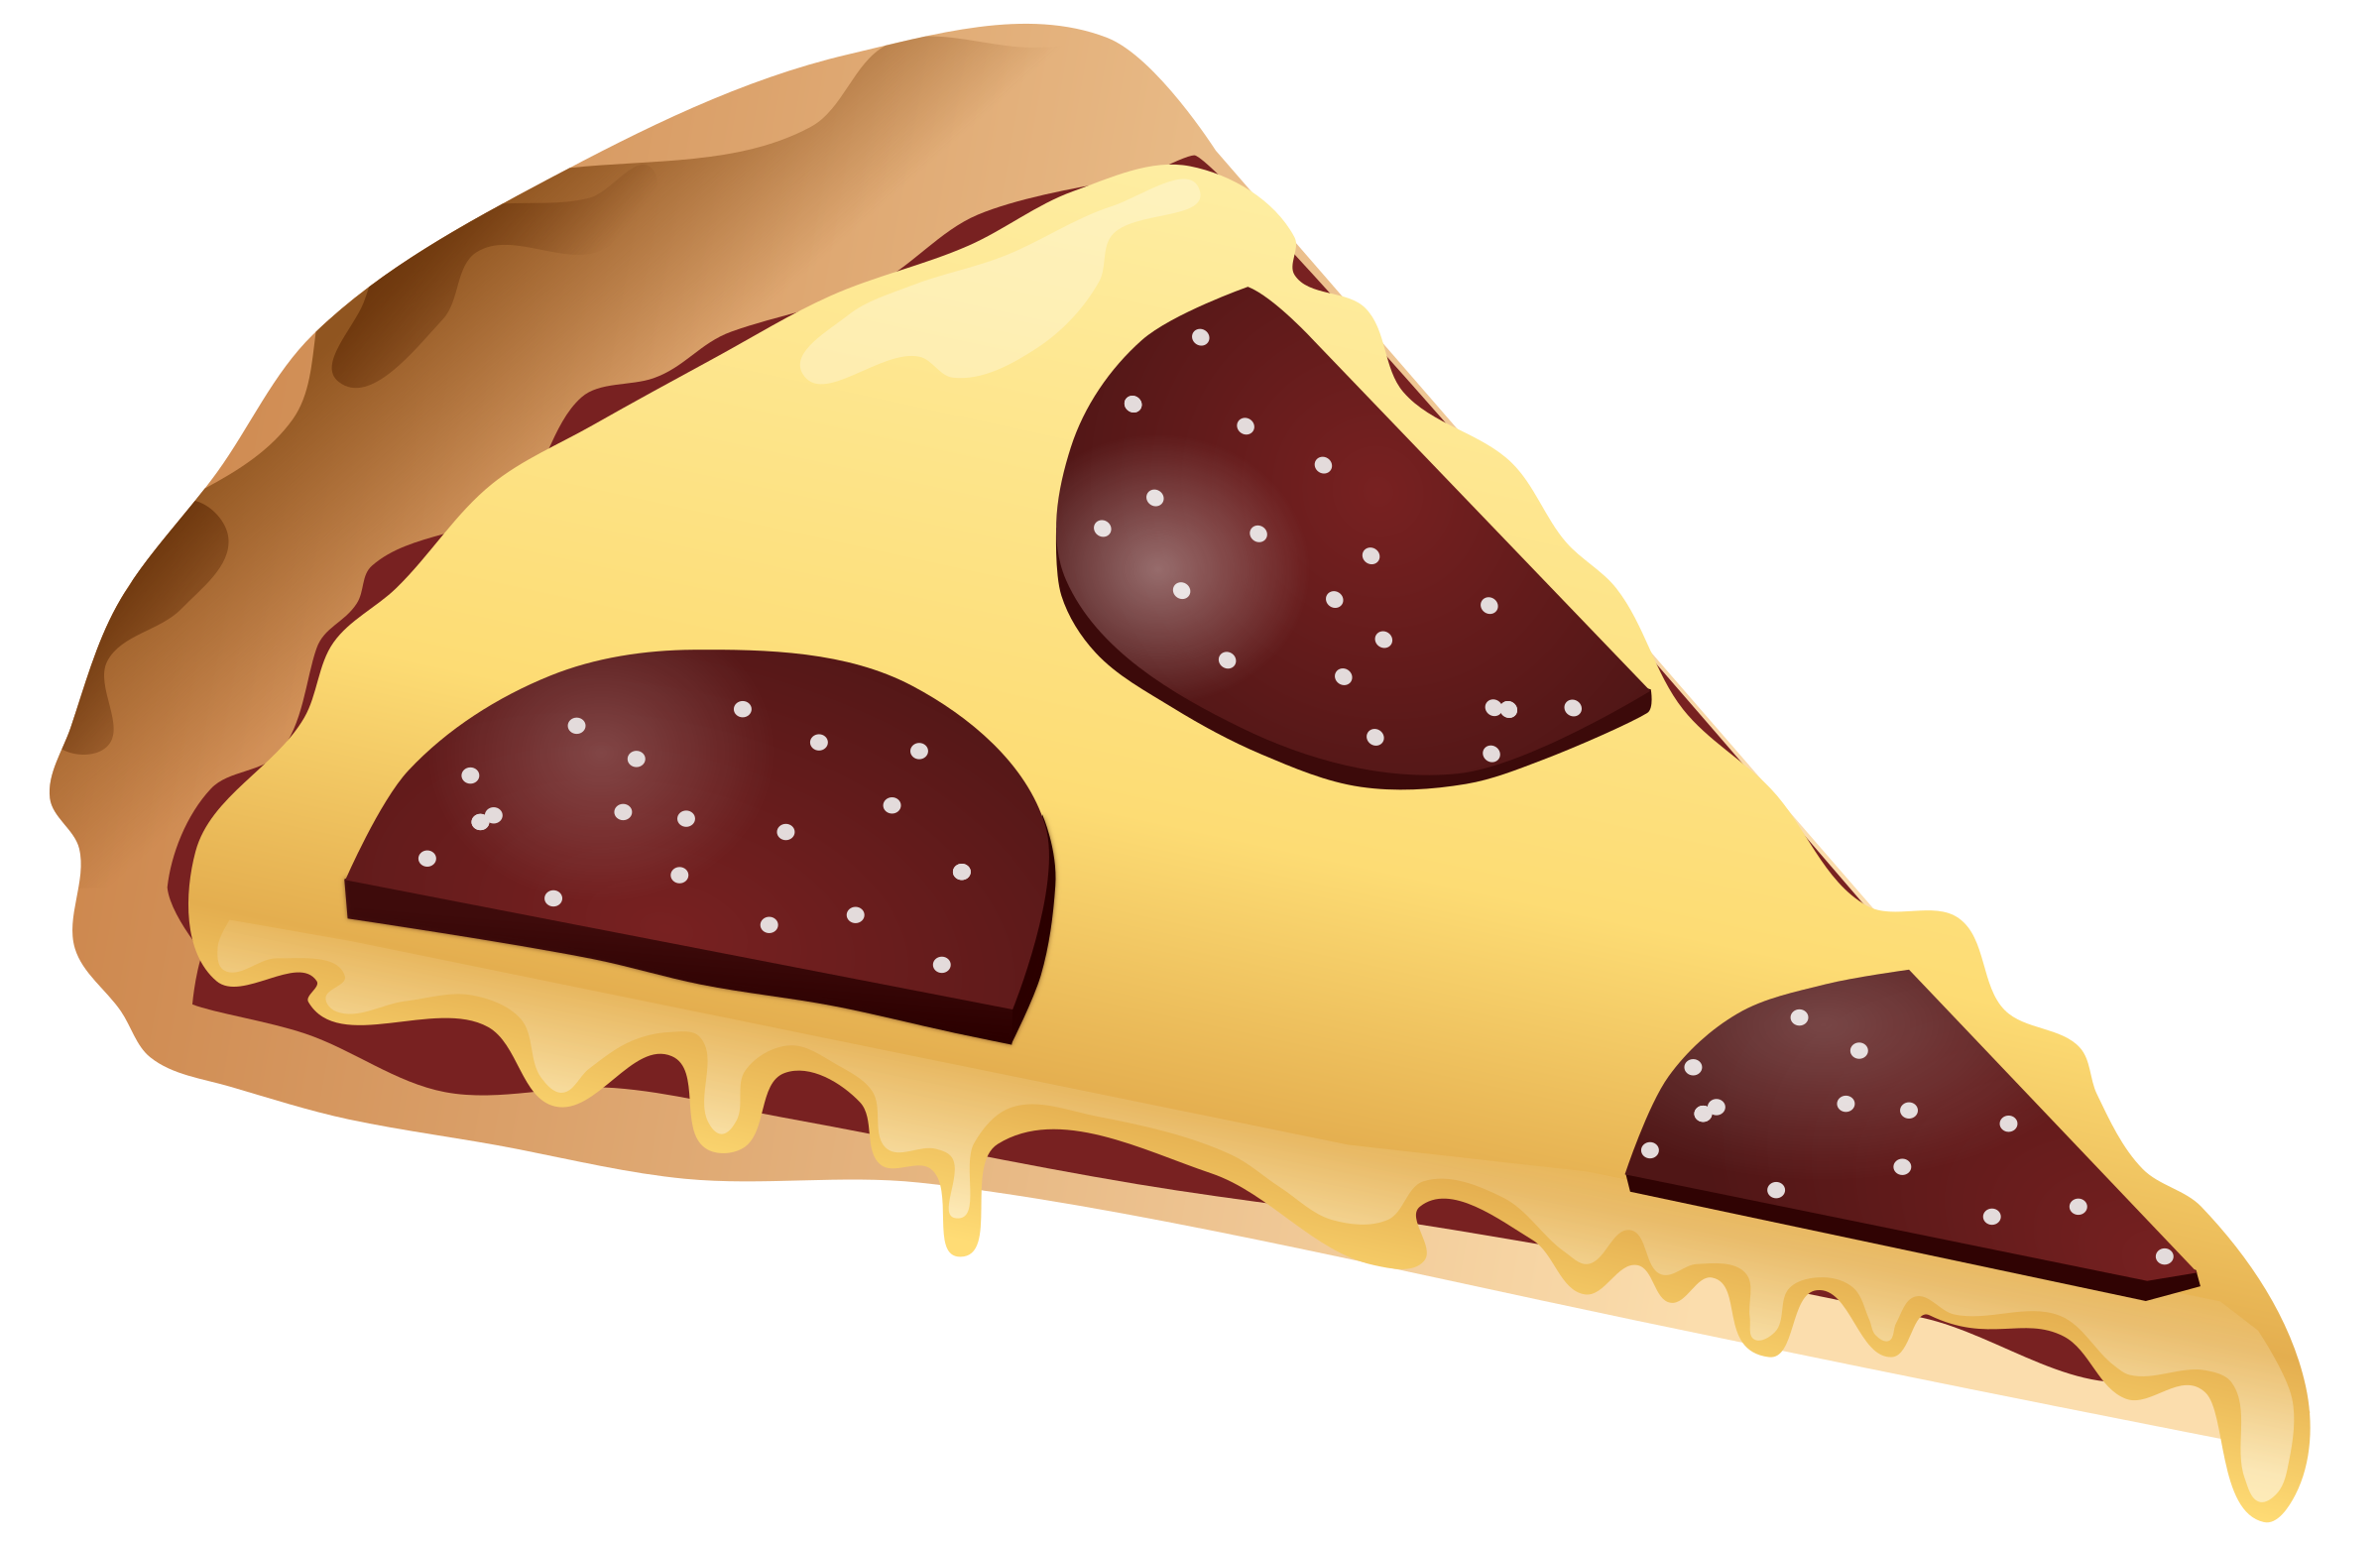 Slice cheese pizza clipart the cliparts 3